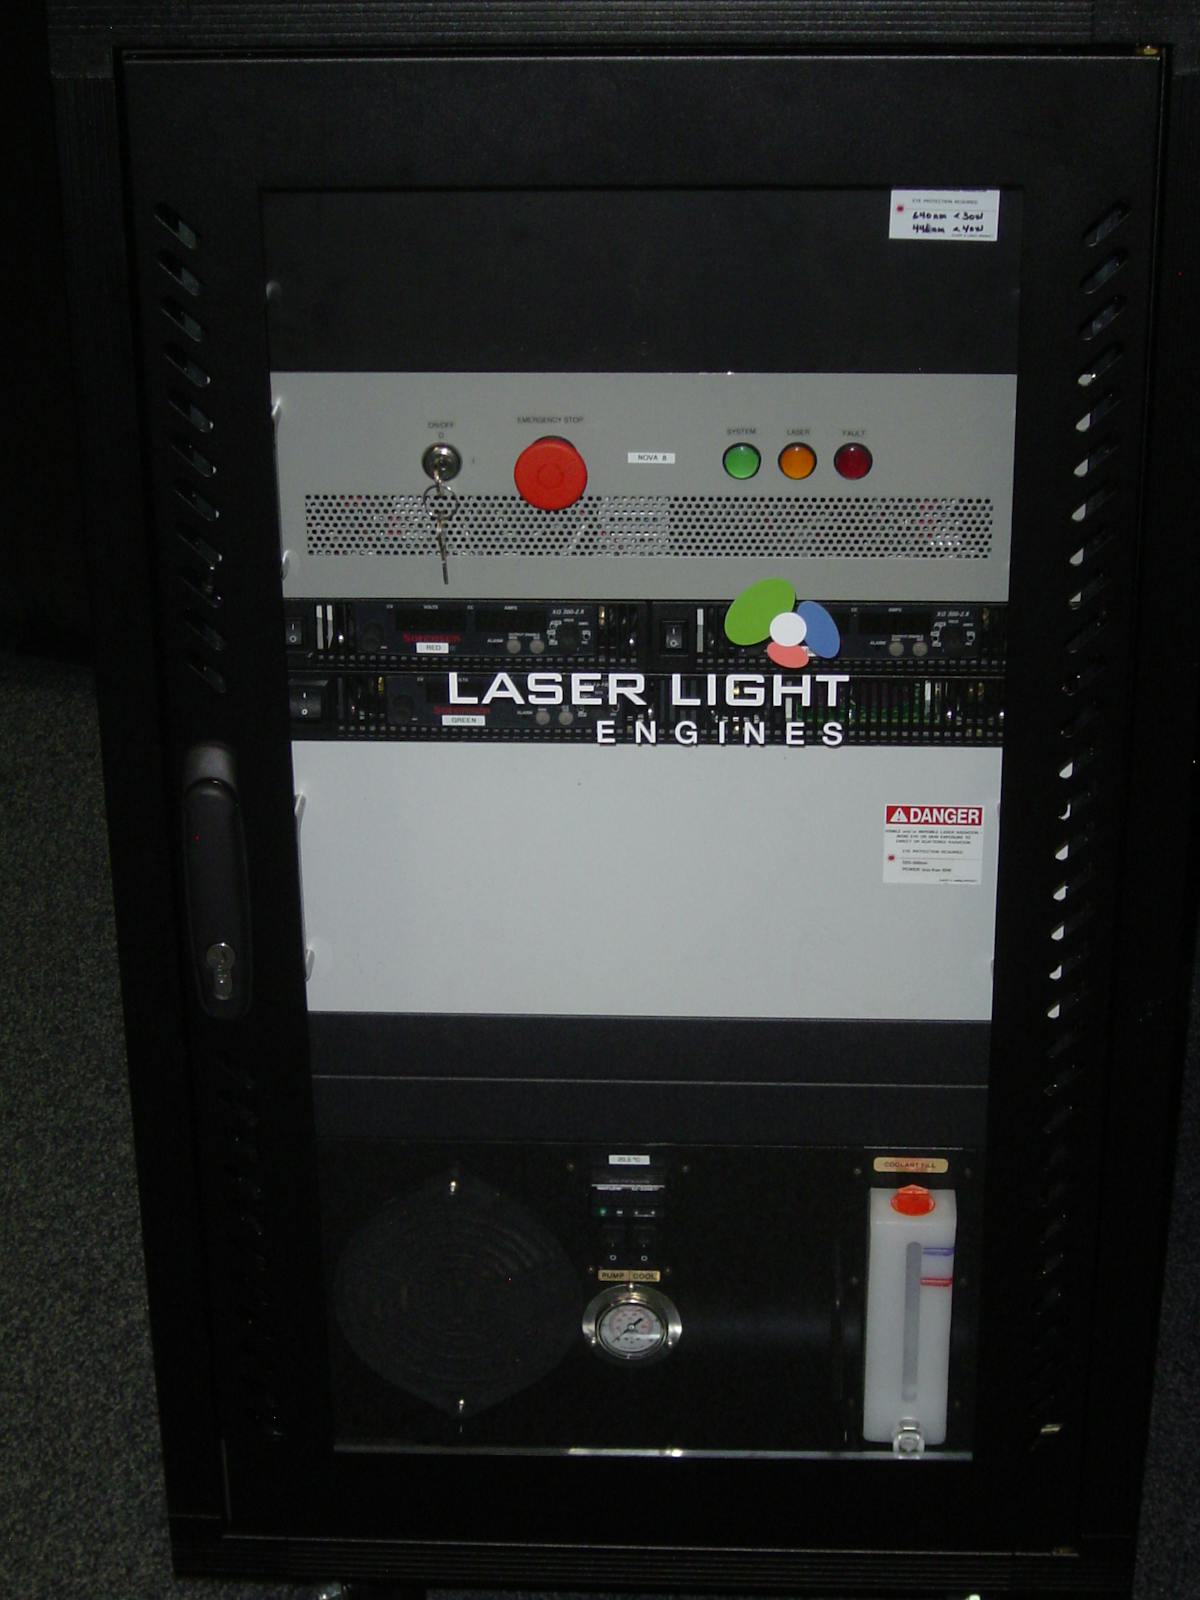 FIGURE 2. A prototype laser engine was demonstrated at the 3D Cinema Demo, an event held at the 2012 National Association of Broadcasters (NAB) Technology Summit on Cinema.